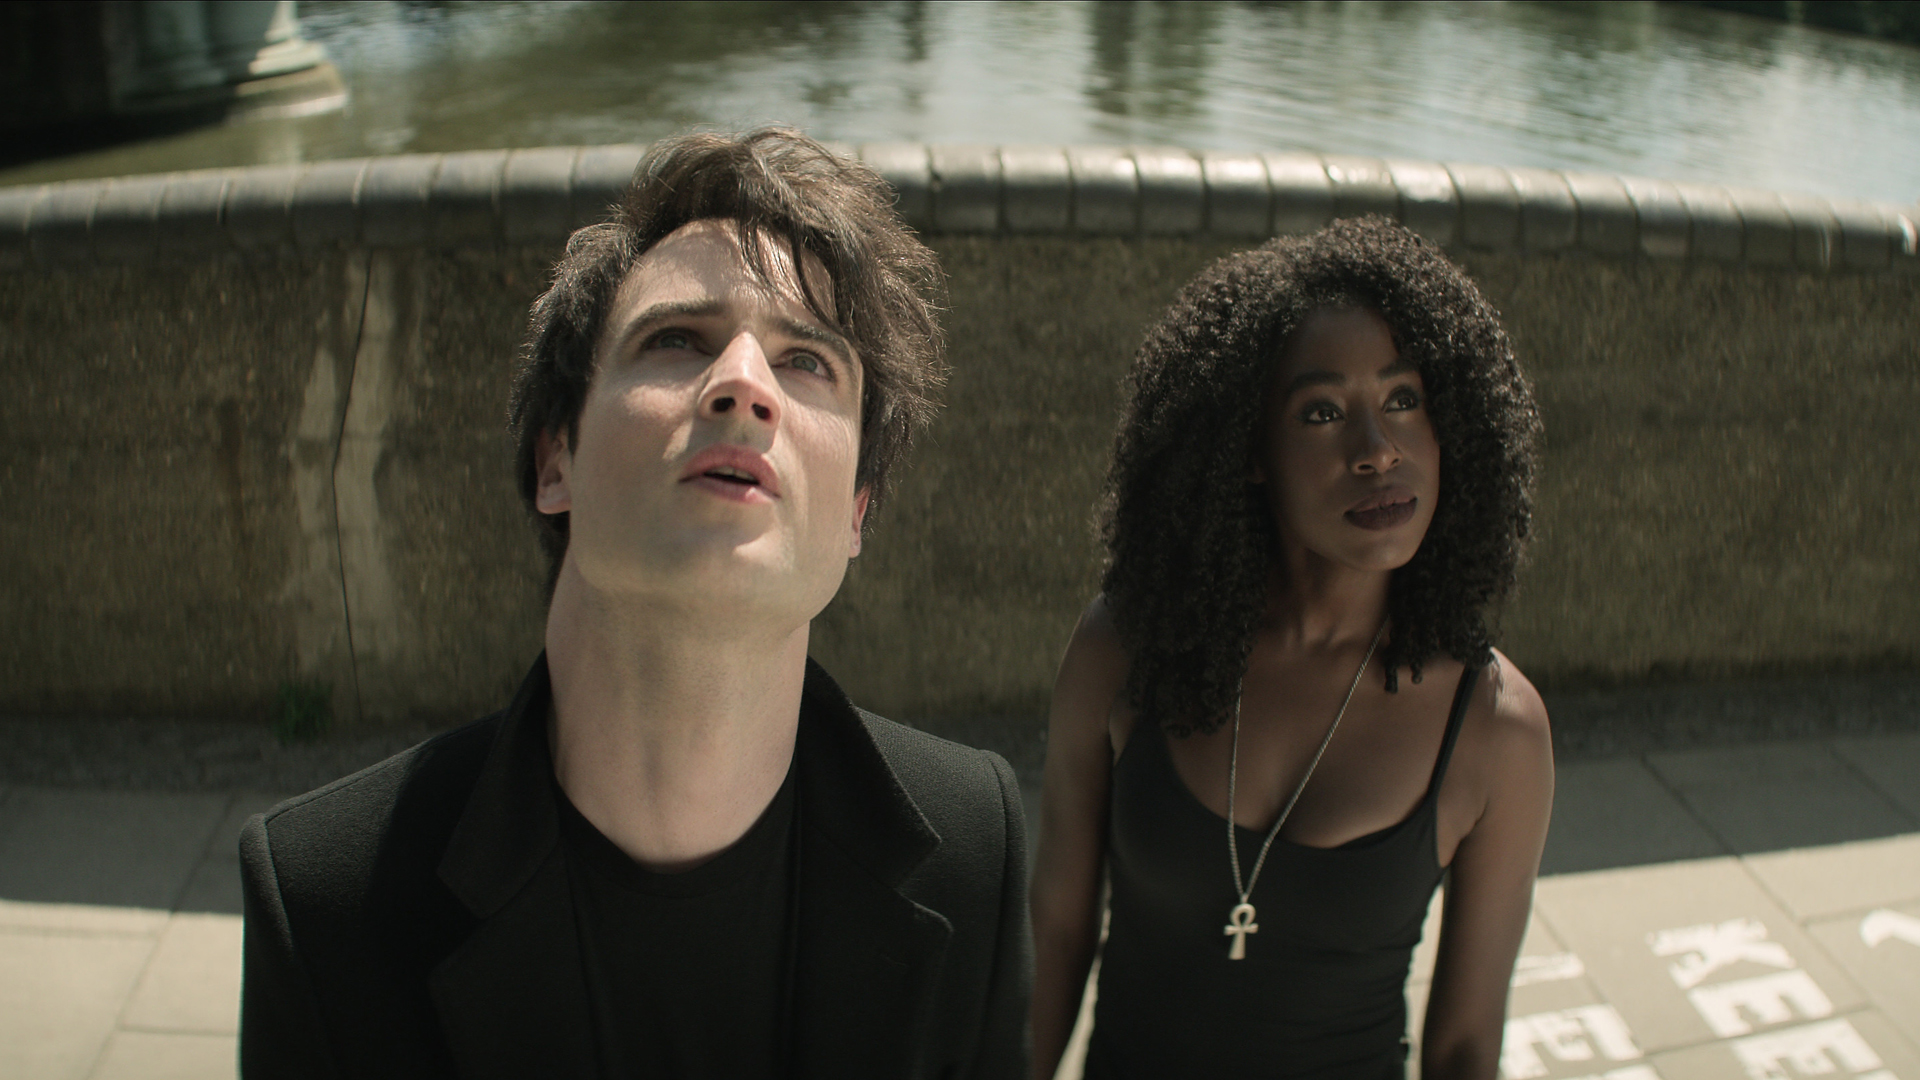 Tom Sturridge's Dream and Kirby Howell-Baptiste's Death look at a building off screen in Netflix's The Sandman TV show